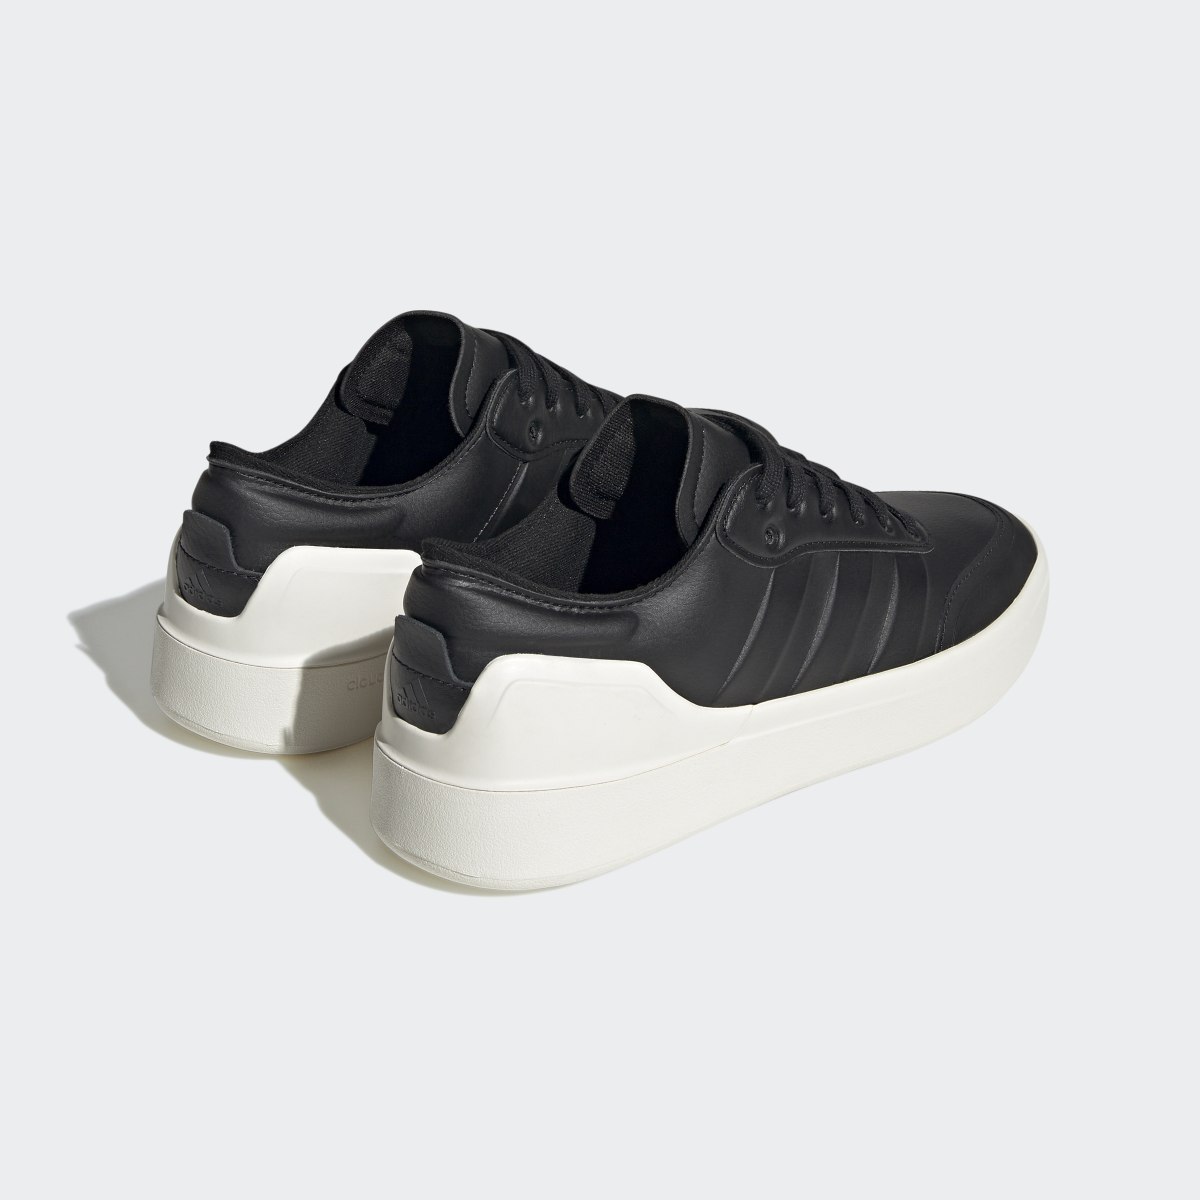 Adidas Court Revival Modern Shoes. 6